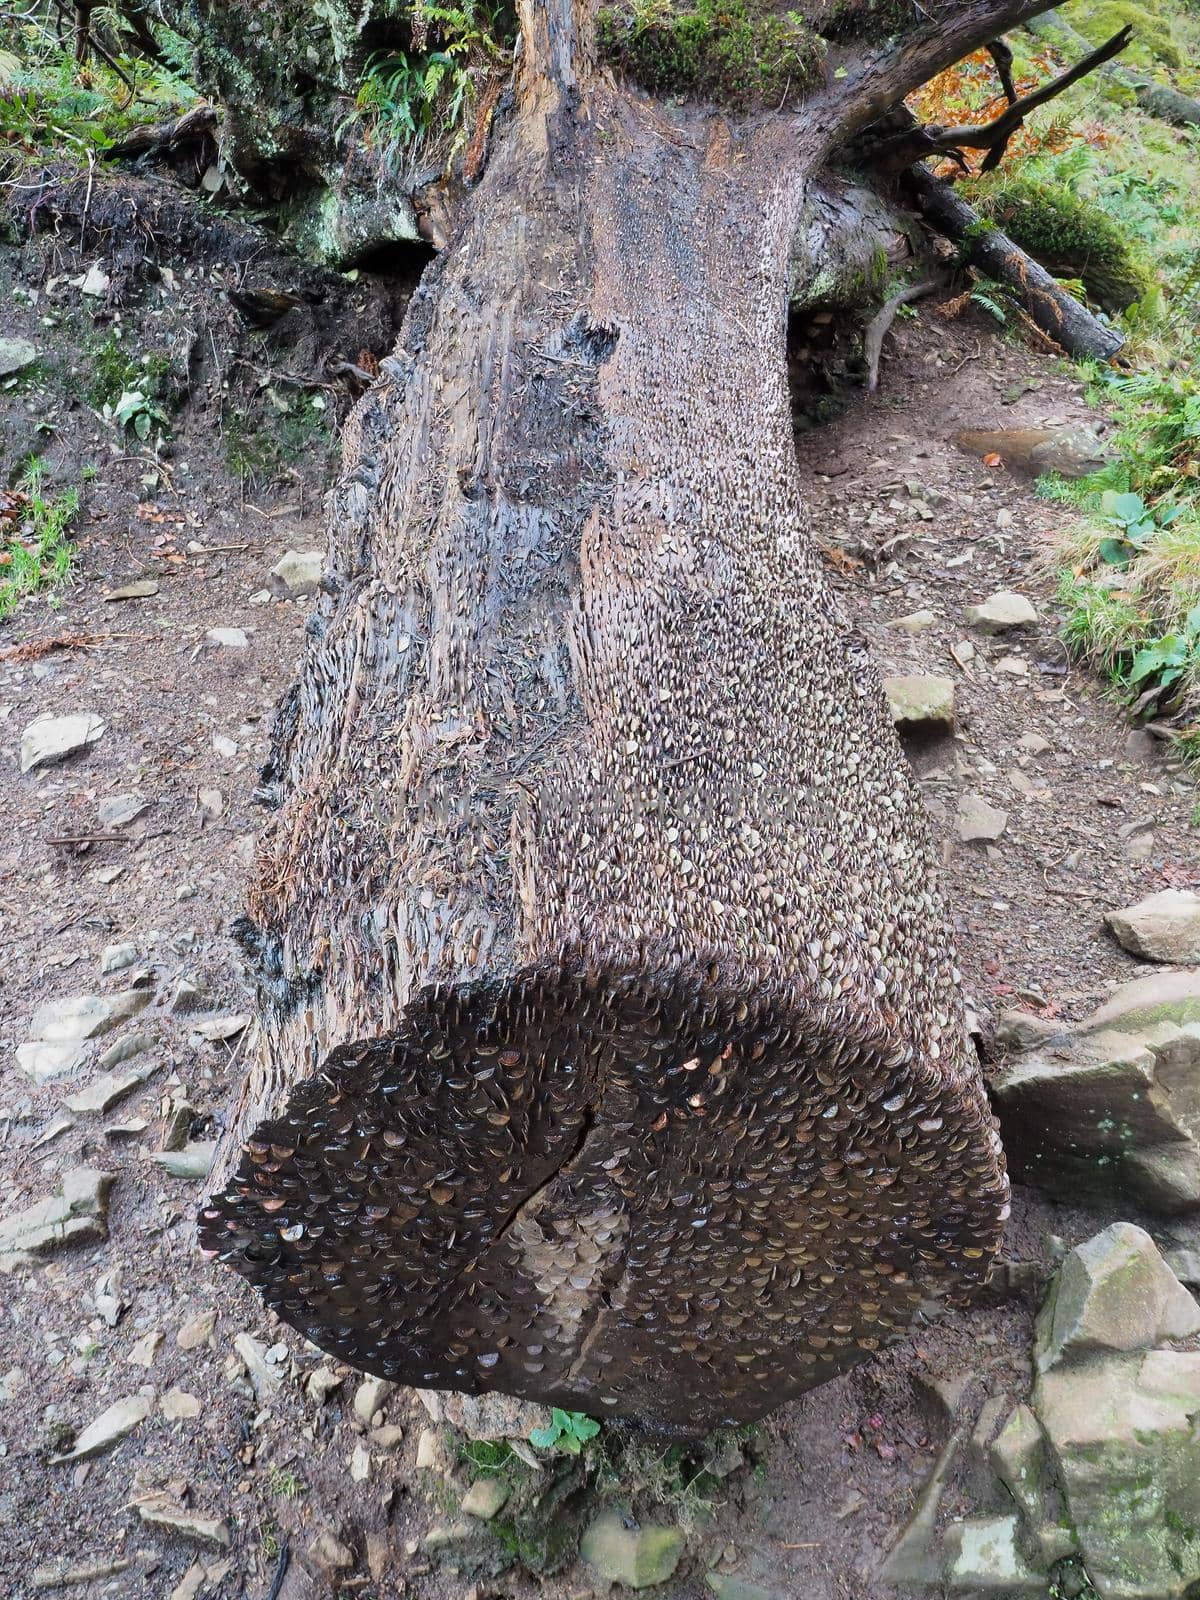 The 'money tree' where people have embedded hundreds of coins in the bark of the old trunk to make a wish and bring luck, Tarn Hows, Lake District, UK